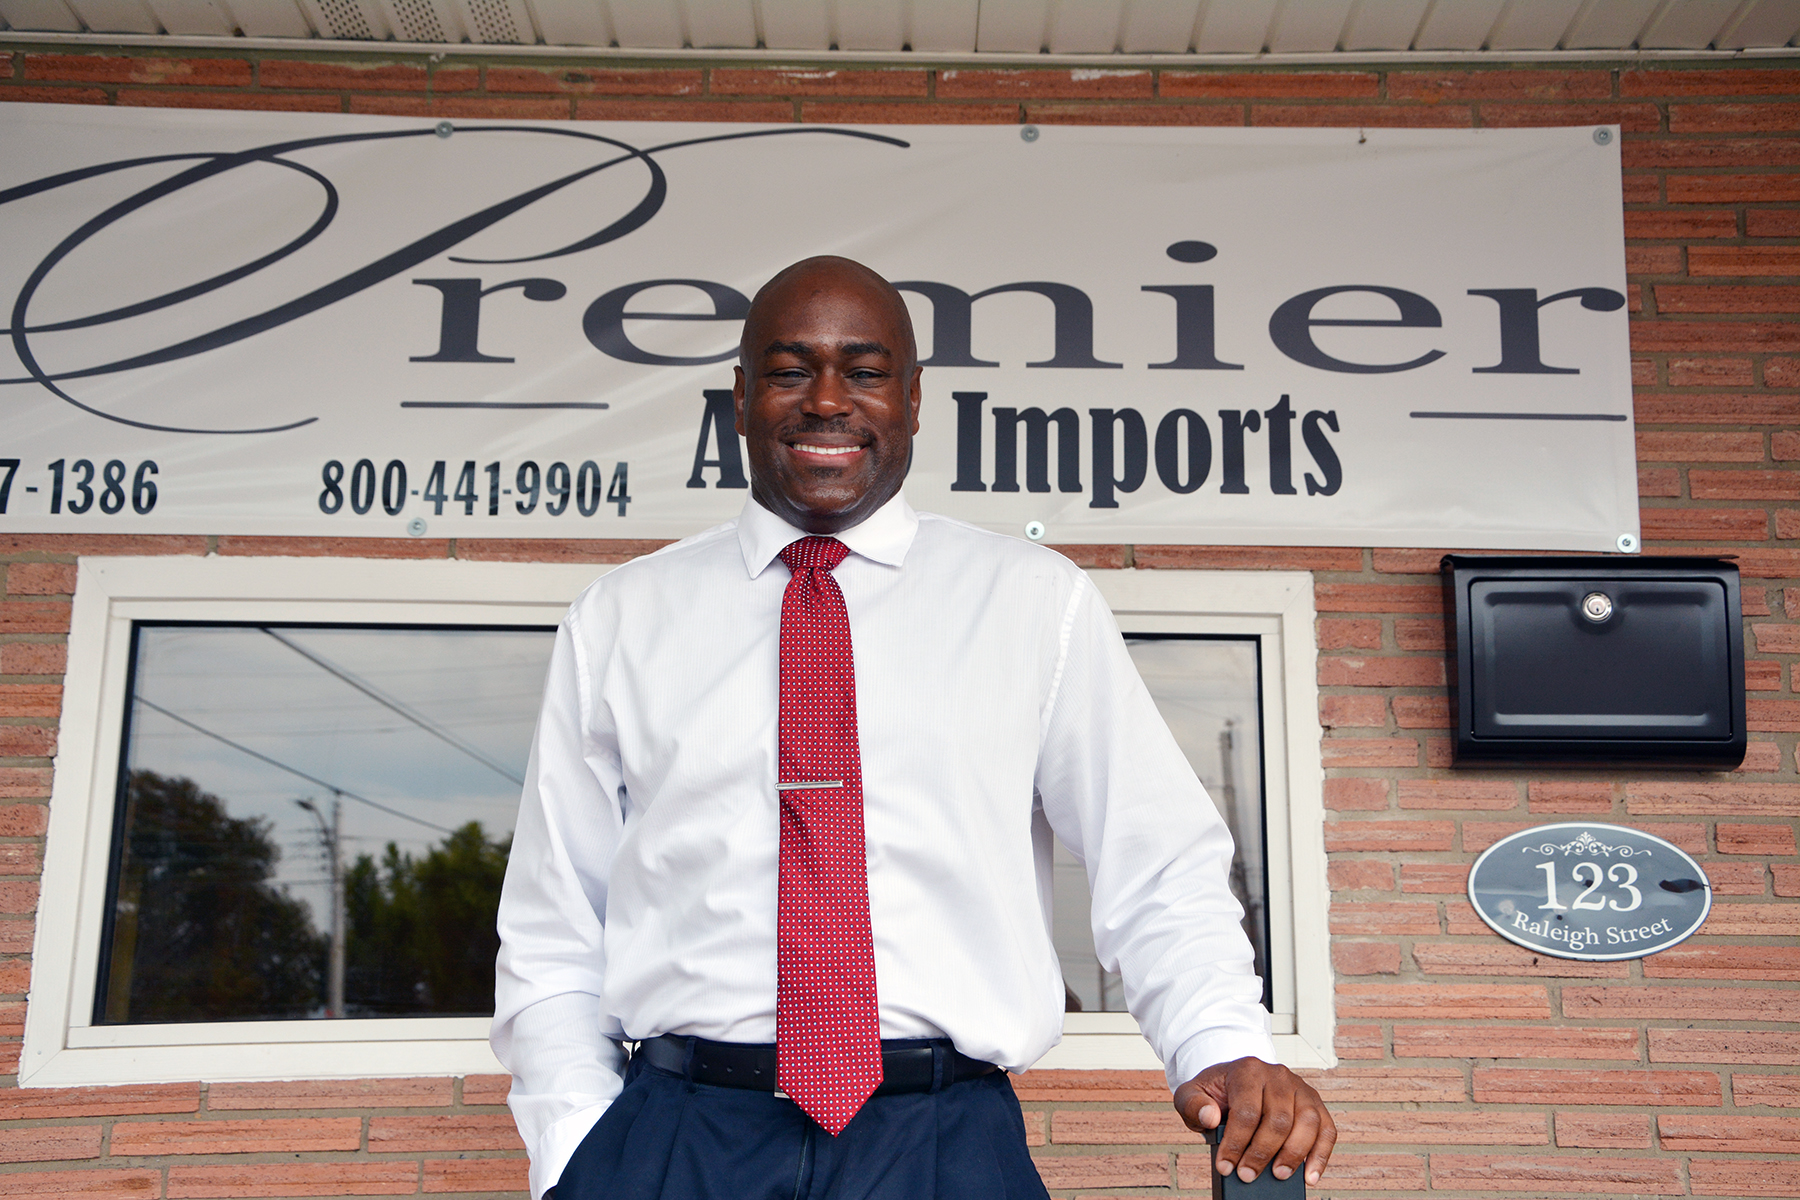 Anthony Fuller owns Premier Auto Imports, a car dealership in downtown Hamlet which specializes in premium imported vehicles. Fuller used resources provided by Richmond Community College’s Small Business Center when he was researching the community and its needs.